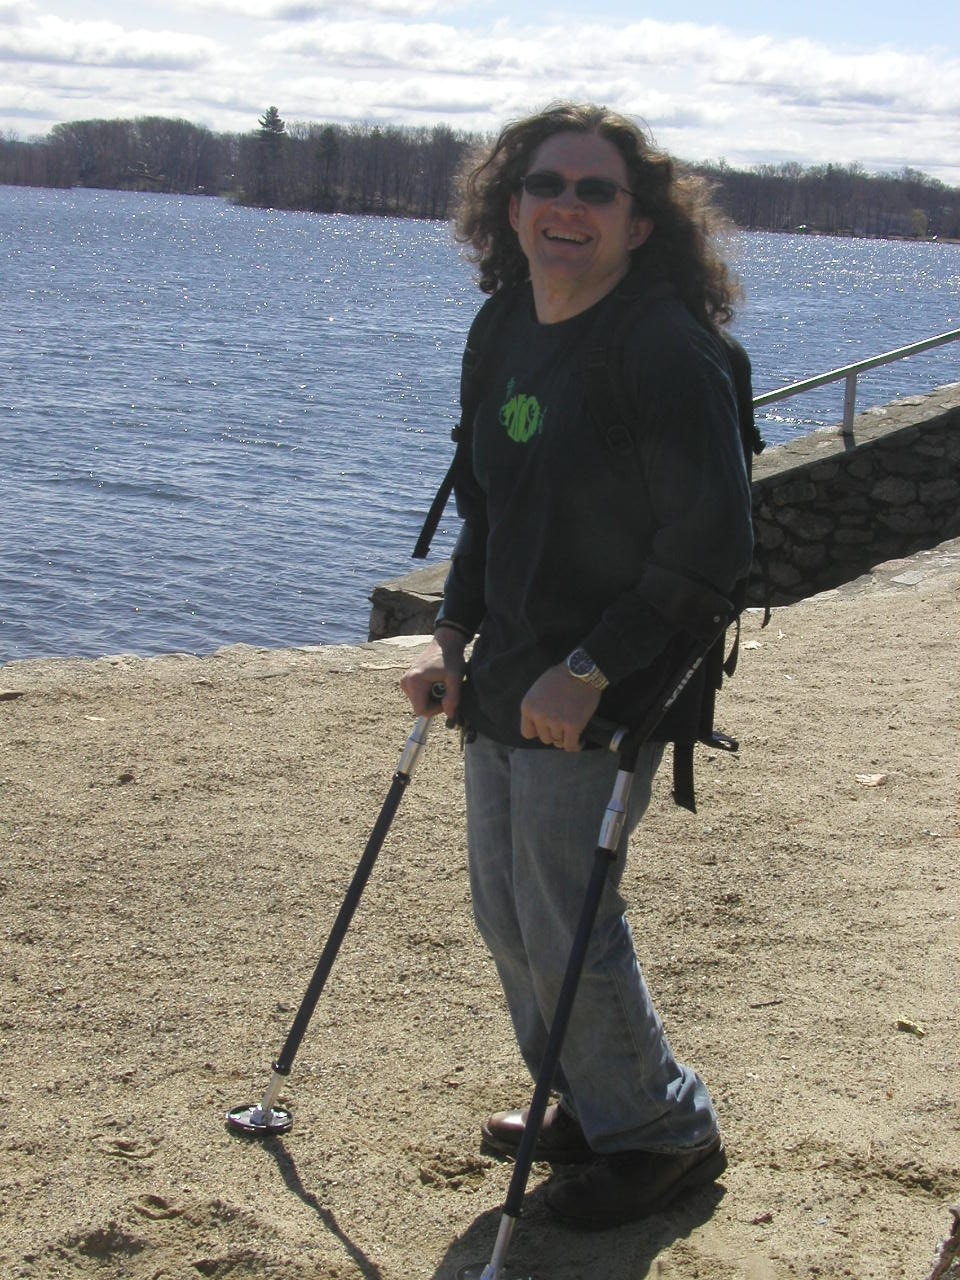 A hiker using SideStix stands on a beach. The crutches have large tips with teeth.